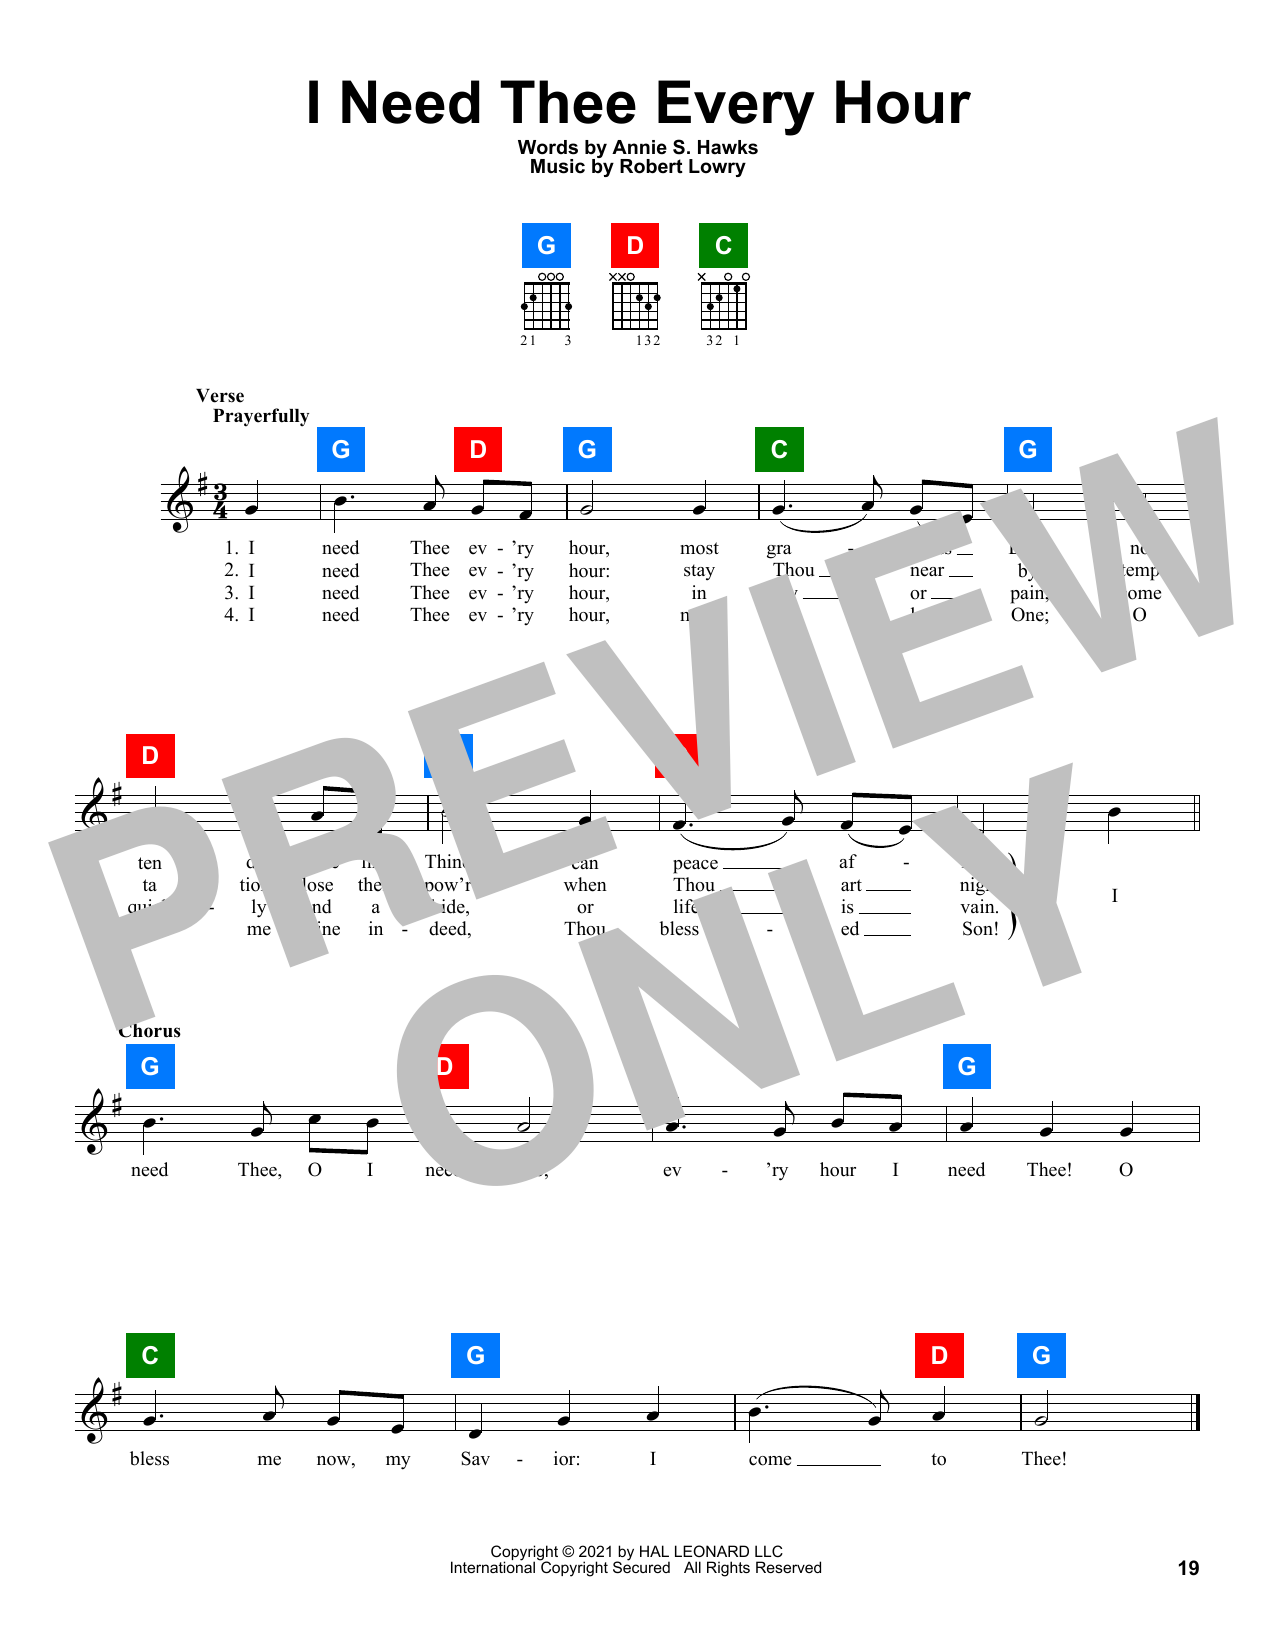 Download Annie S. Hawks I Need Thee Every Hour Sheet Music